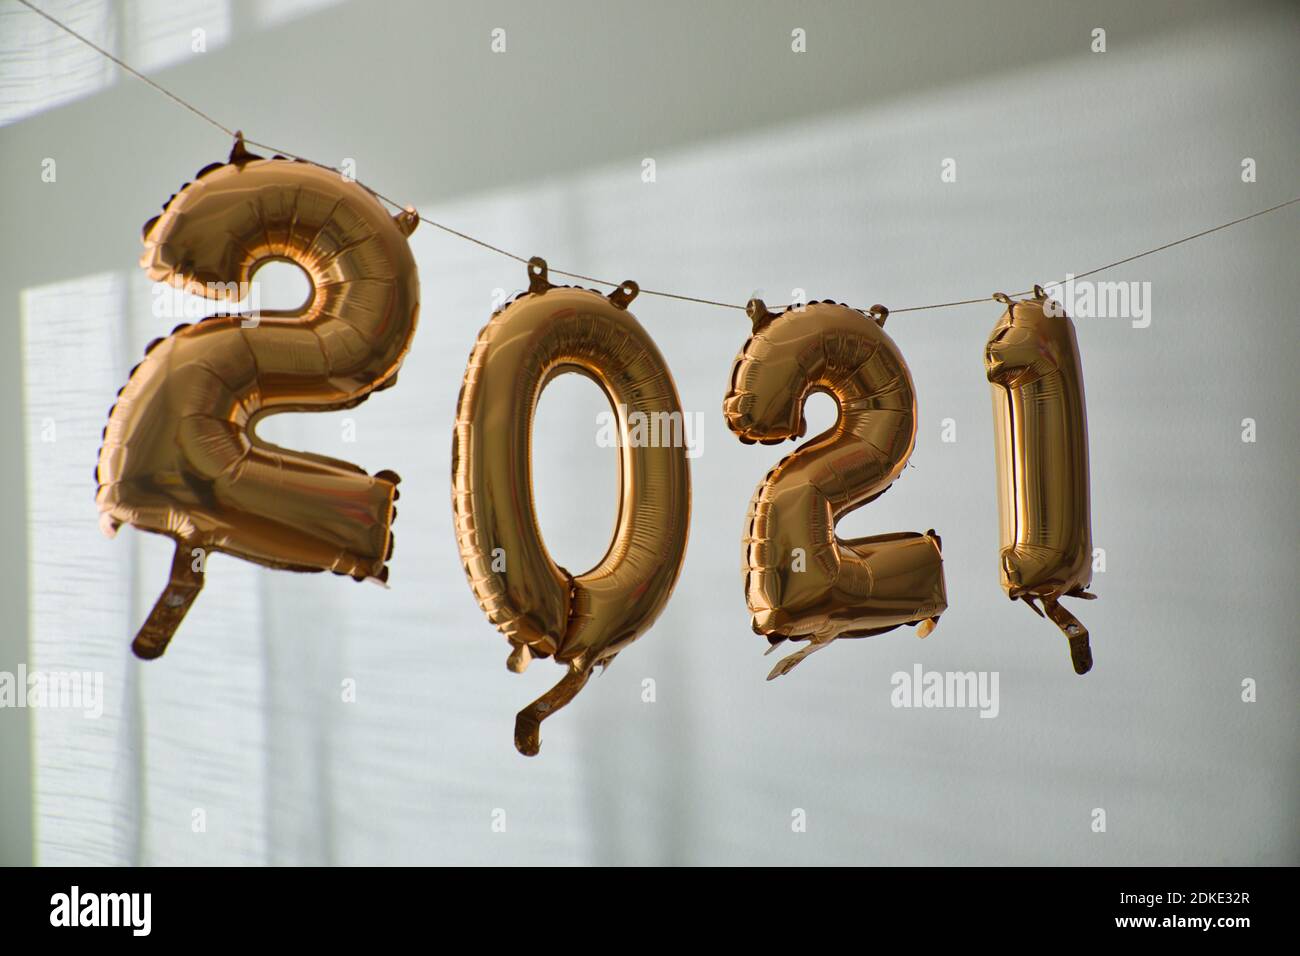 New year's 2021 balloons handing on string indoors. White wall background. Stock Photo